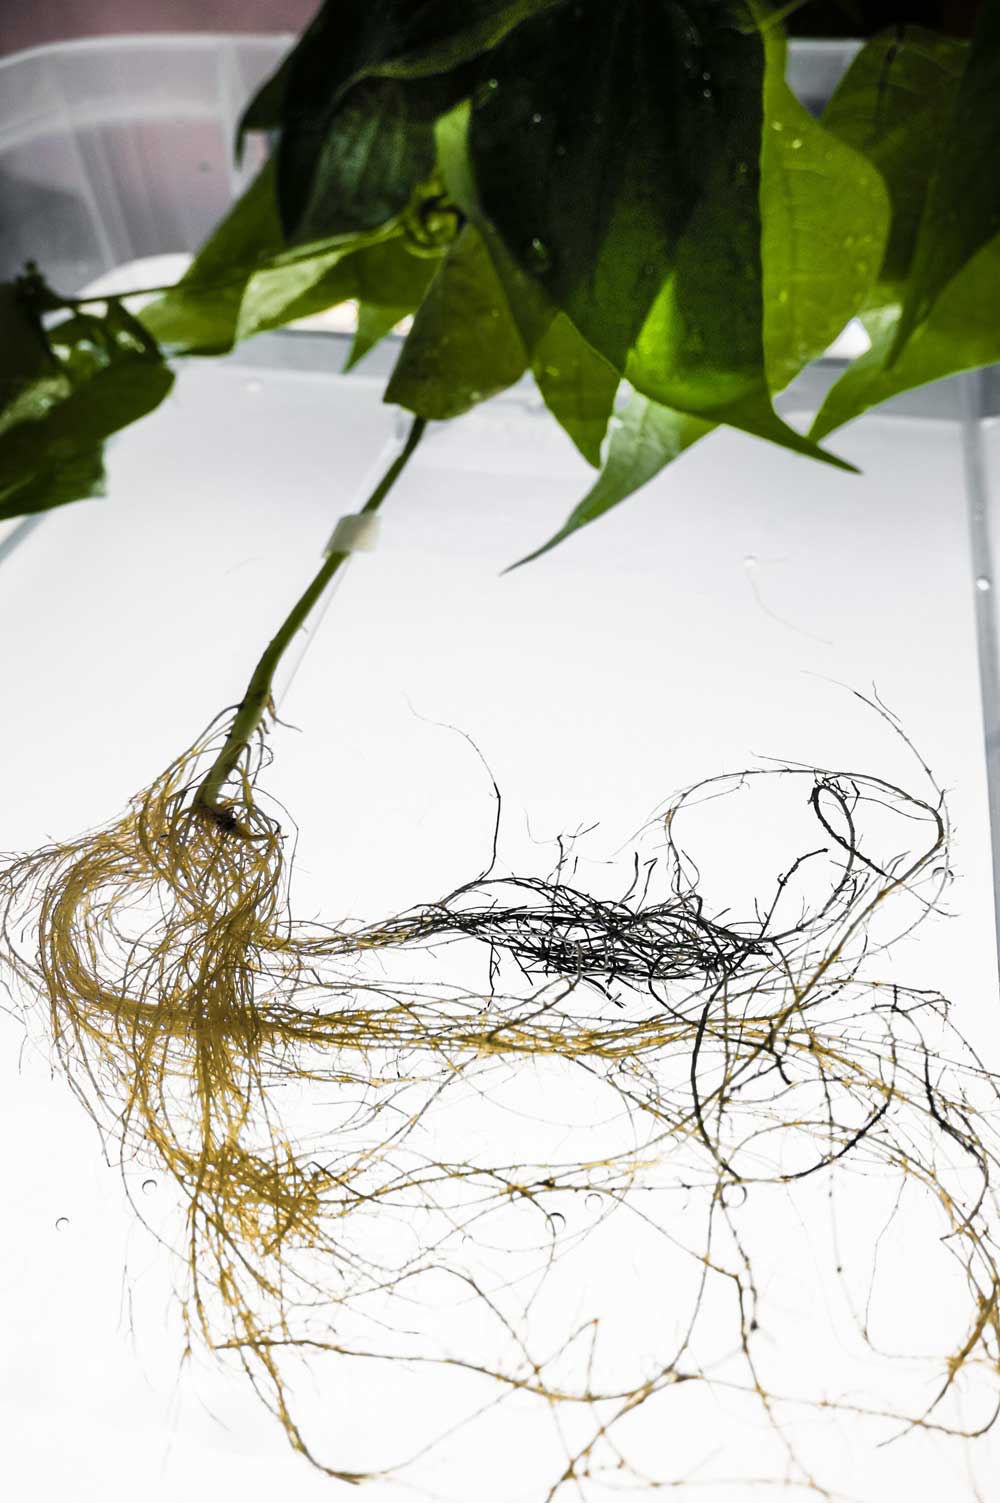 Plant roots are capable of storing energy- research shows